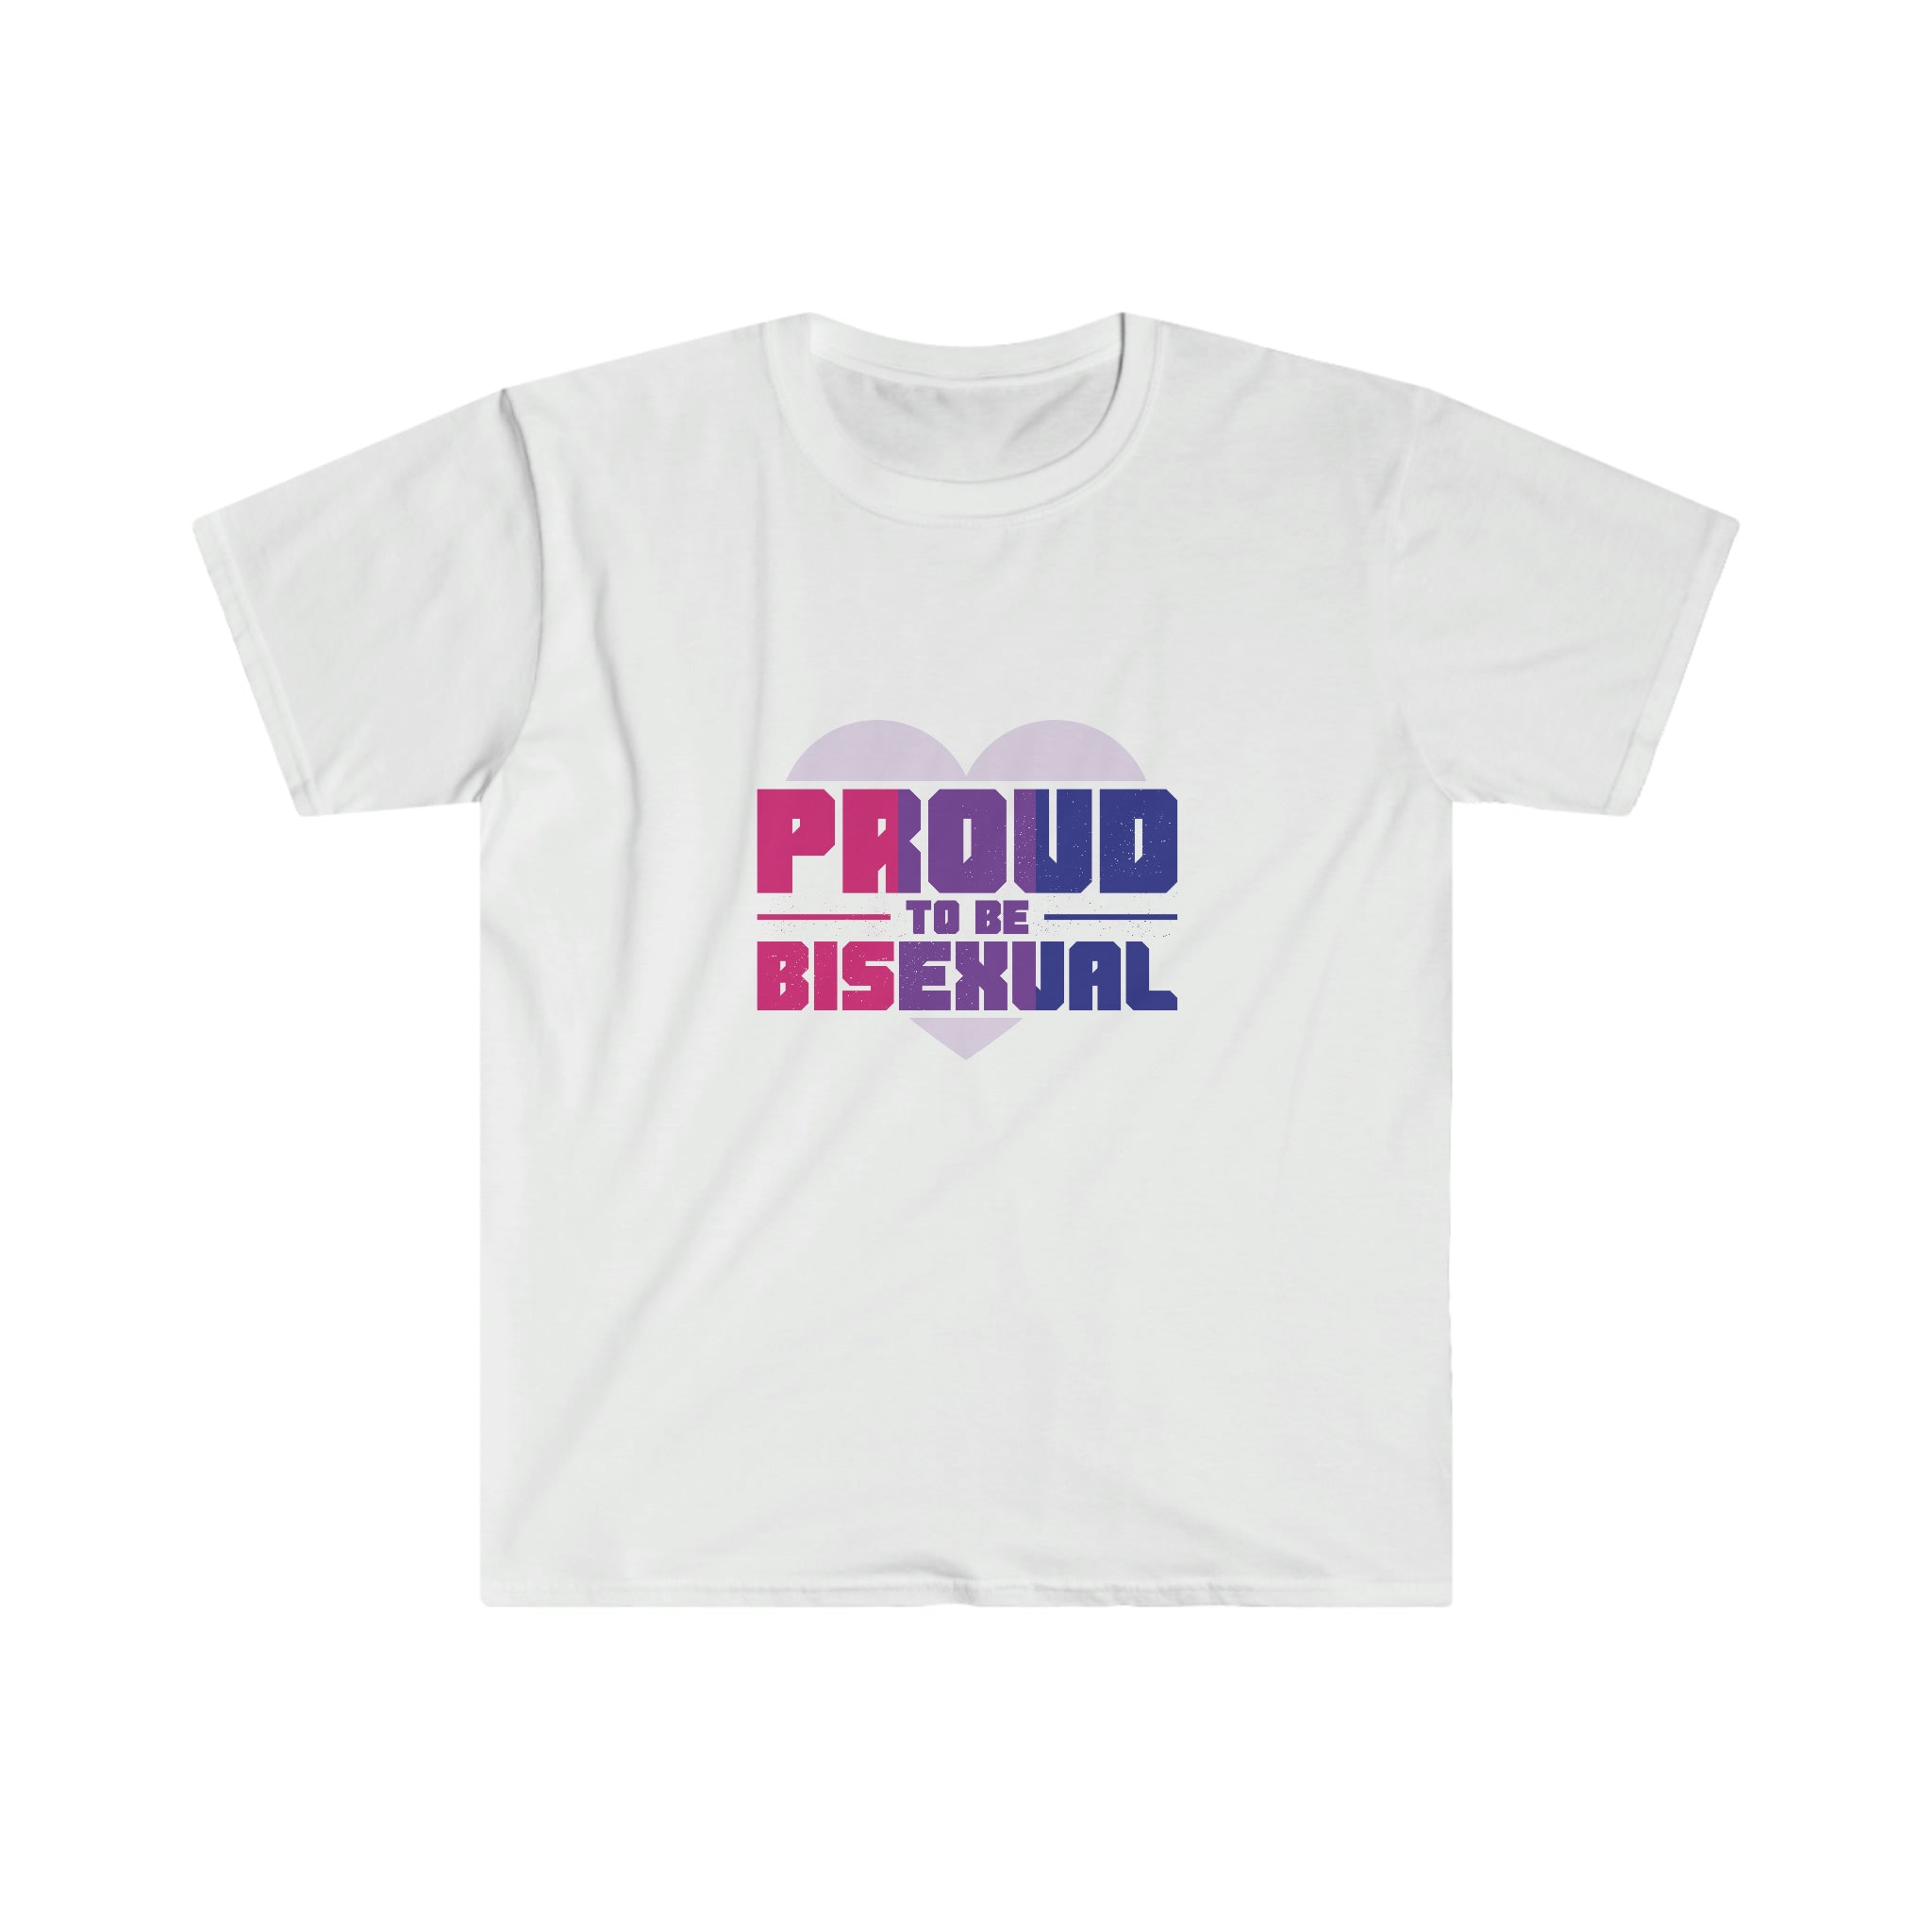 A white Proud to Be Bi T-Shirt, perfect for showing support for the LGBTQ+ community.